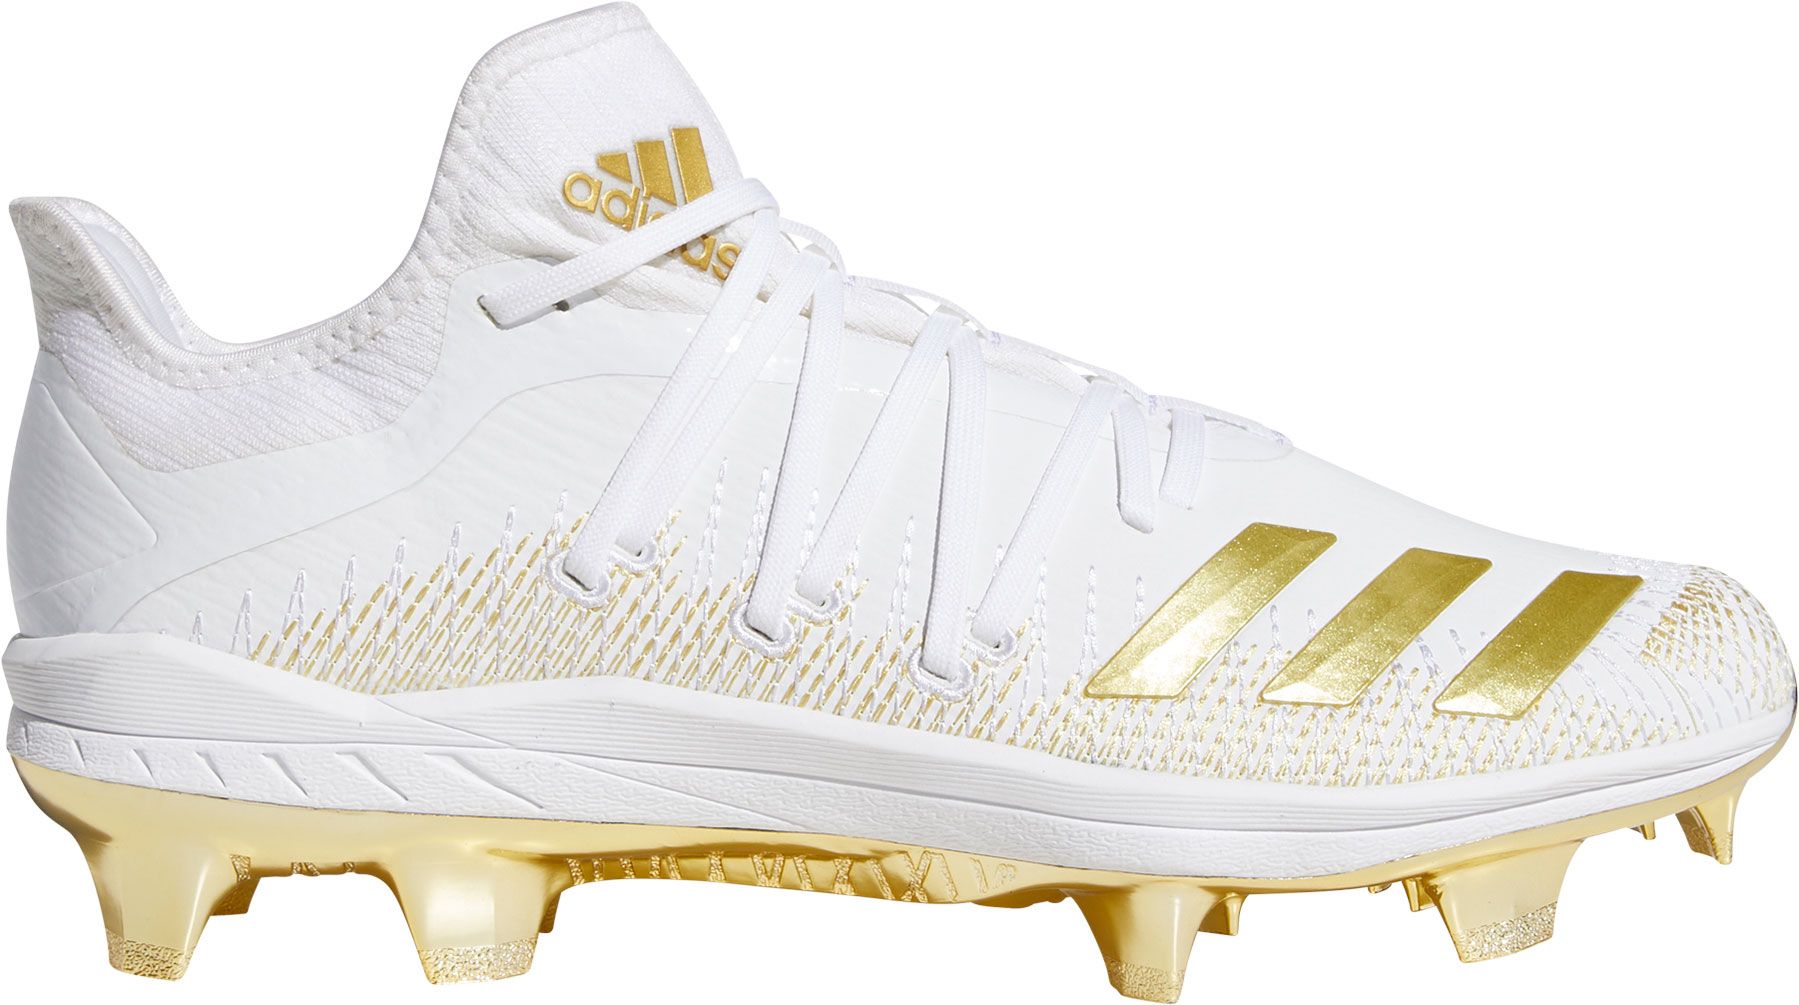 adidas molded cleats